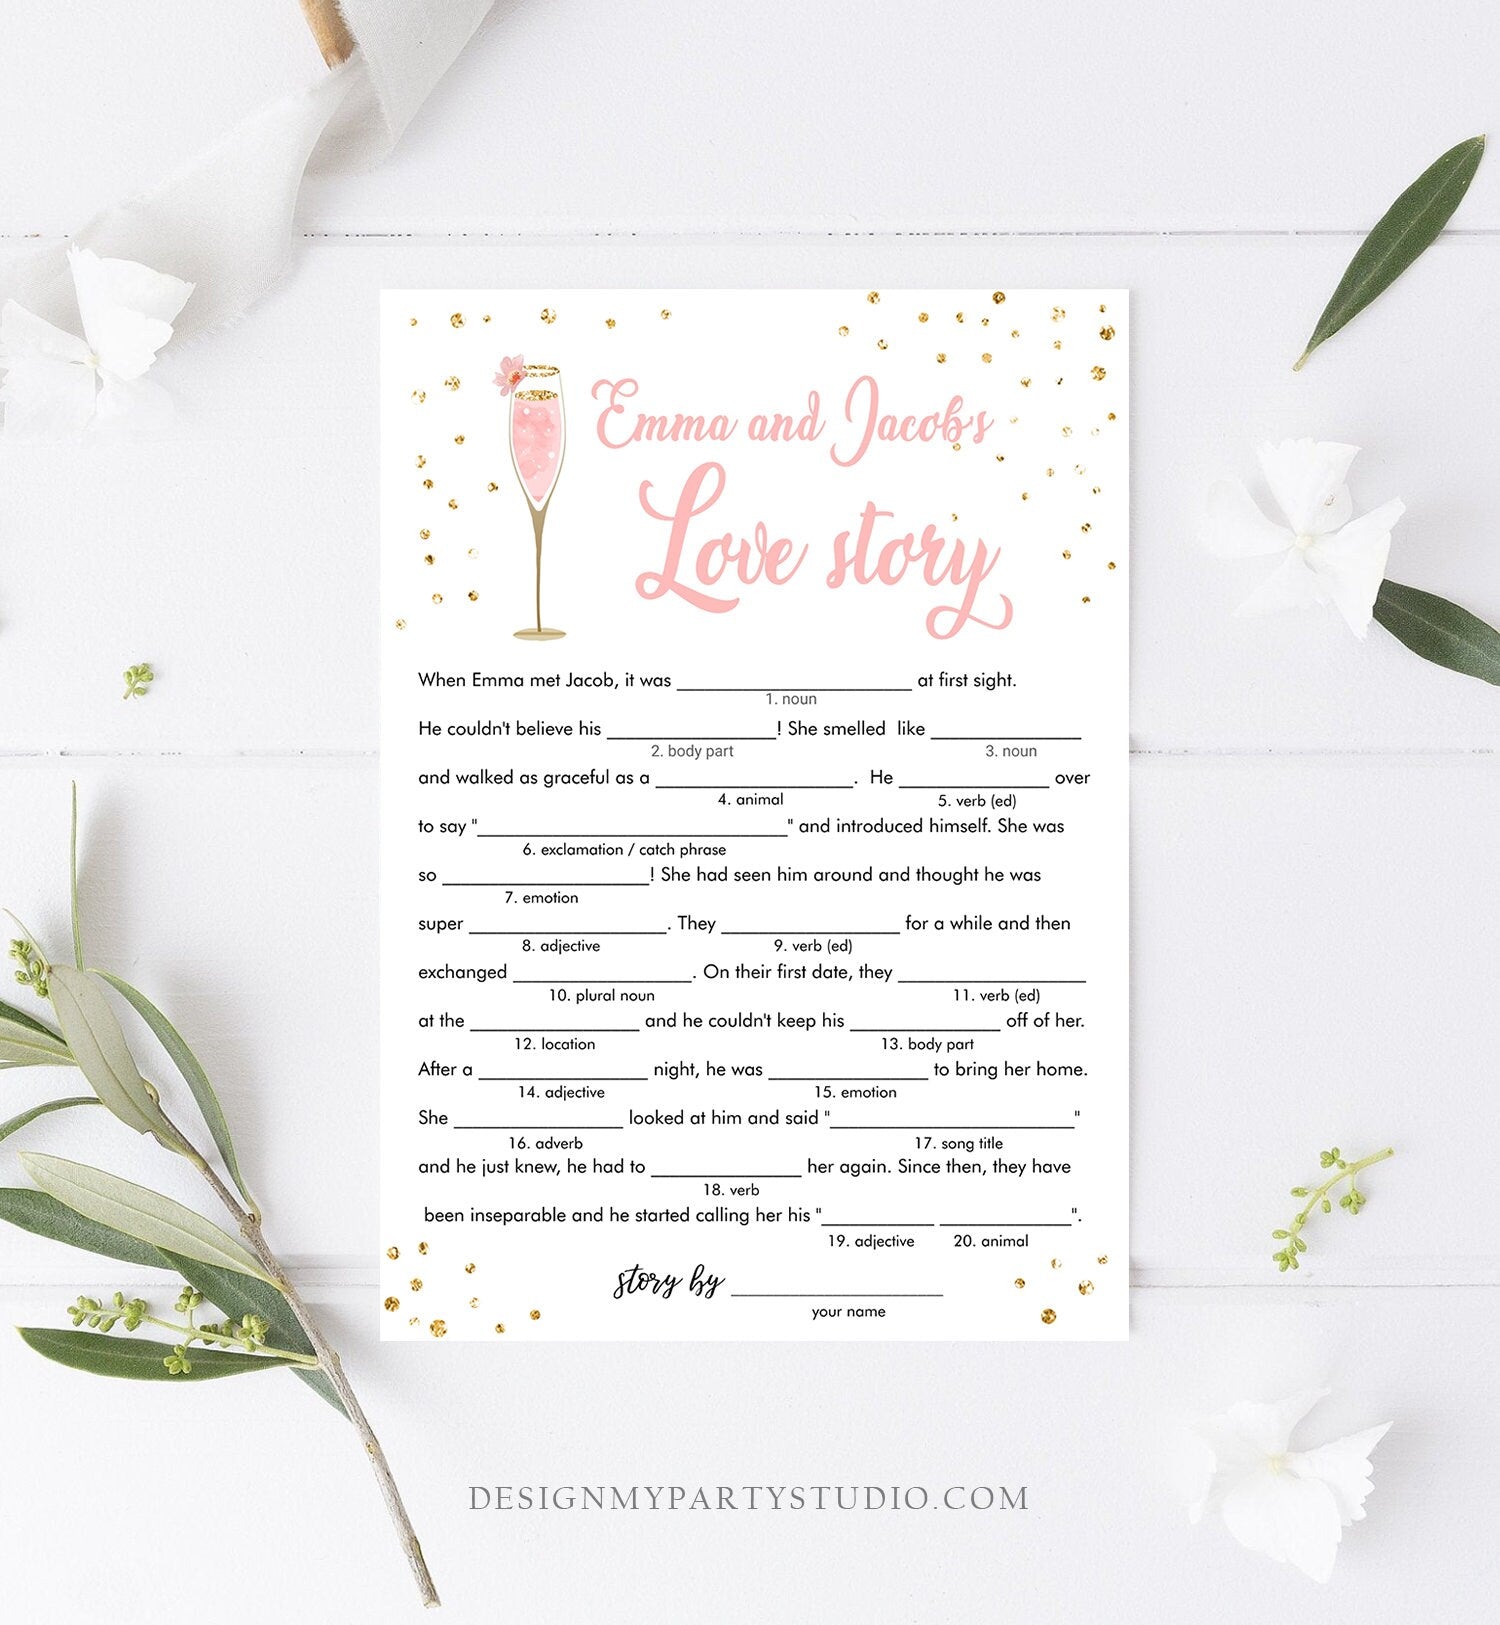 Editable Love Story Bride Bridal Shower Game Brunch and Bubbly Mad Libs Bride Groom Wedding Activity Gold Corjl Template Printable 0150